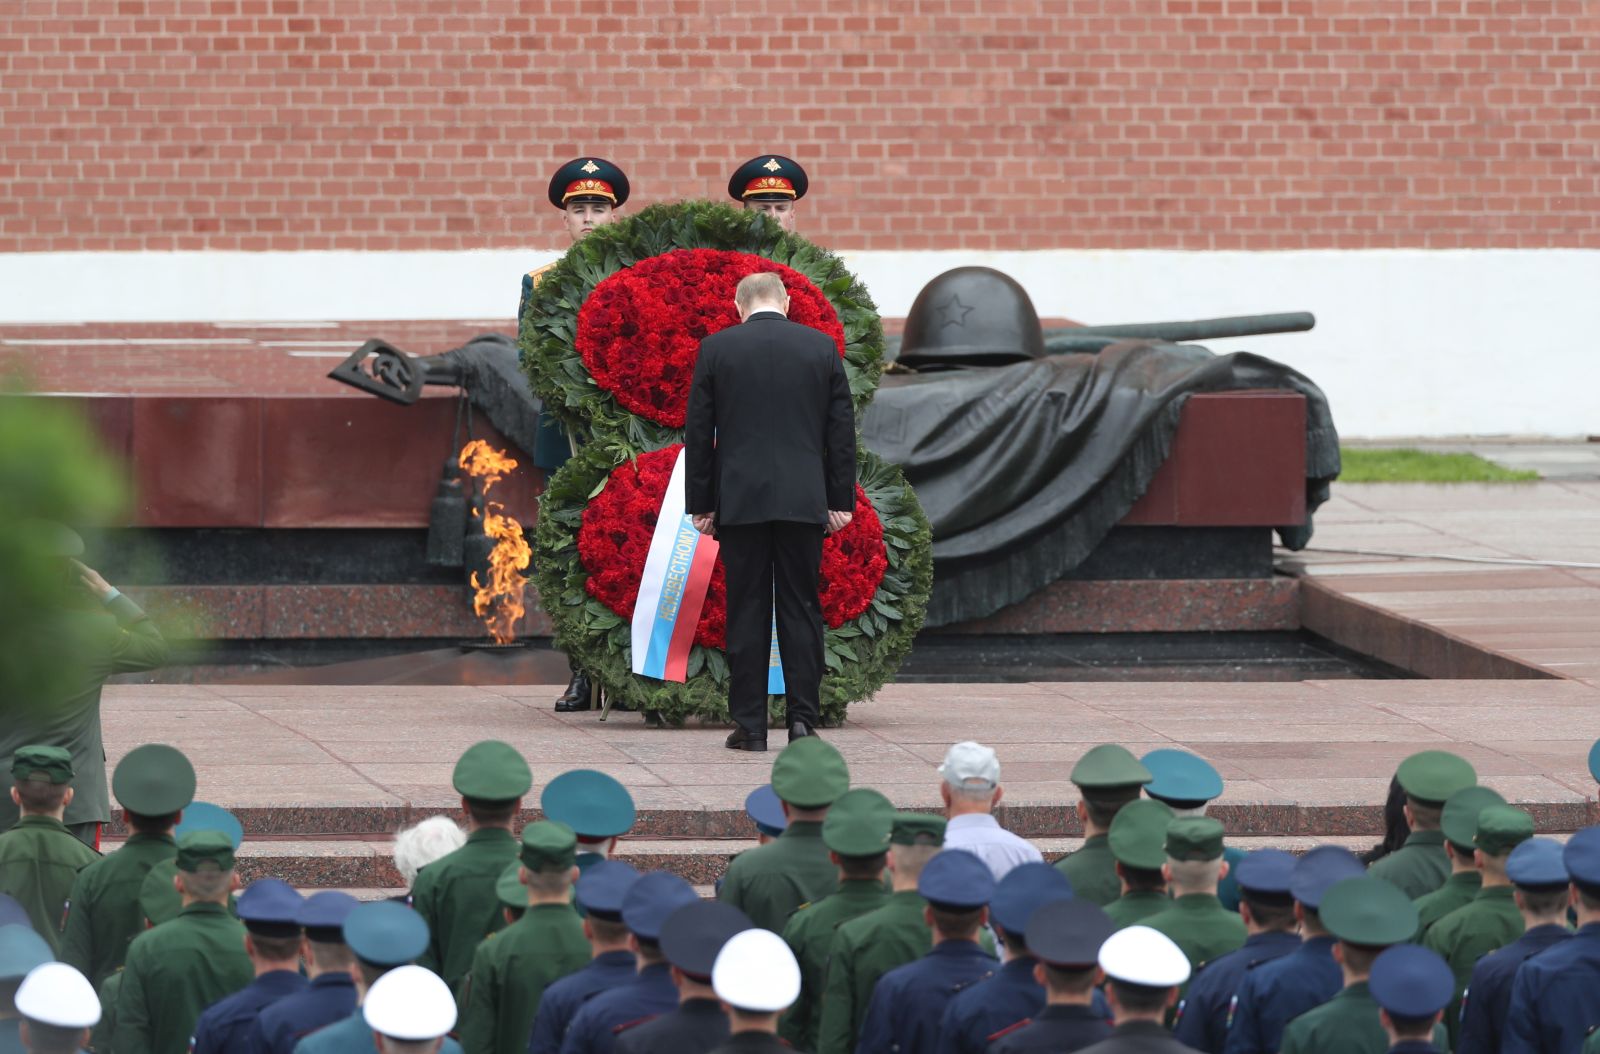 epa10027228 Russian President Vladimir Putin (C) attends a wreath-laying ceremony at the Tomb of the Unknown Soldier to mark the Day of Remembrance and Sorrow, at the Alexandrovsky Garden near the Kremlin wall in Moscow, Russia, 22 June 2022. Day of Remembrance and Sorrow is observed annually on 22 June in Russia to commemorate those who died defending the Soviet Union from Nazi Germany and its allies during Operation Barbarossa, launched on 22 June 1941.  EPA/MAXIM SHIPENKOV